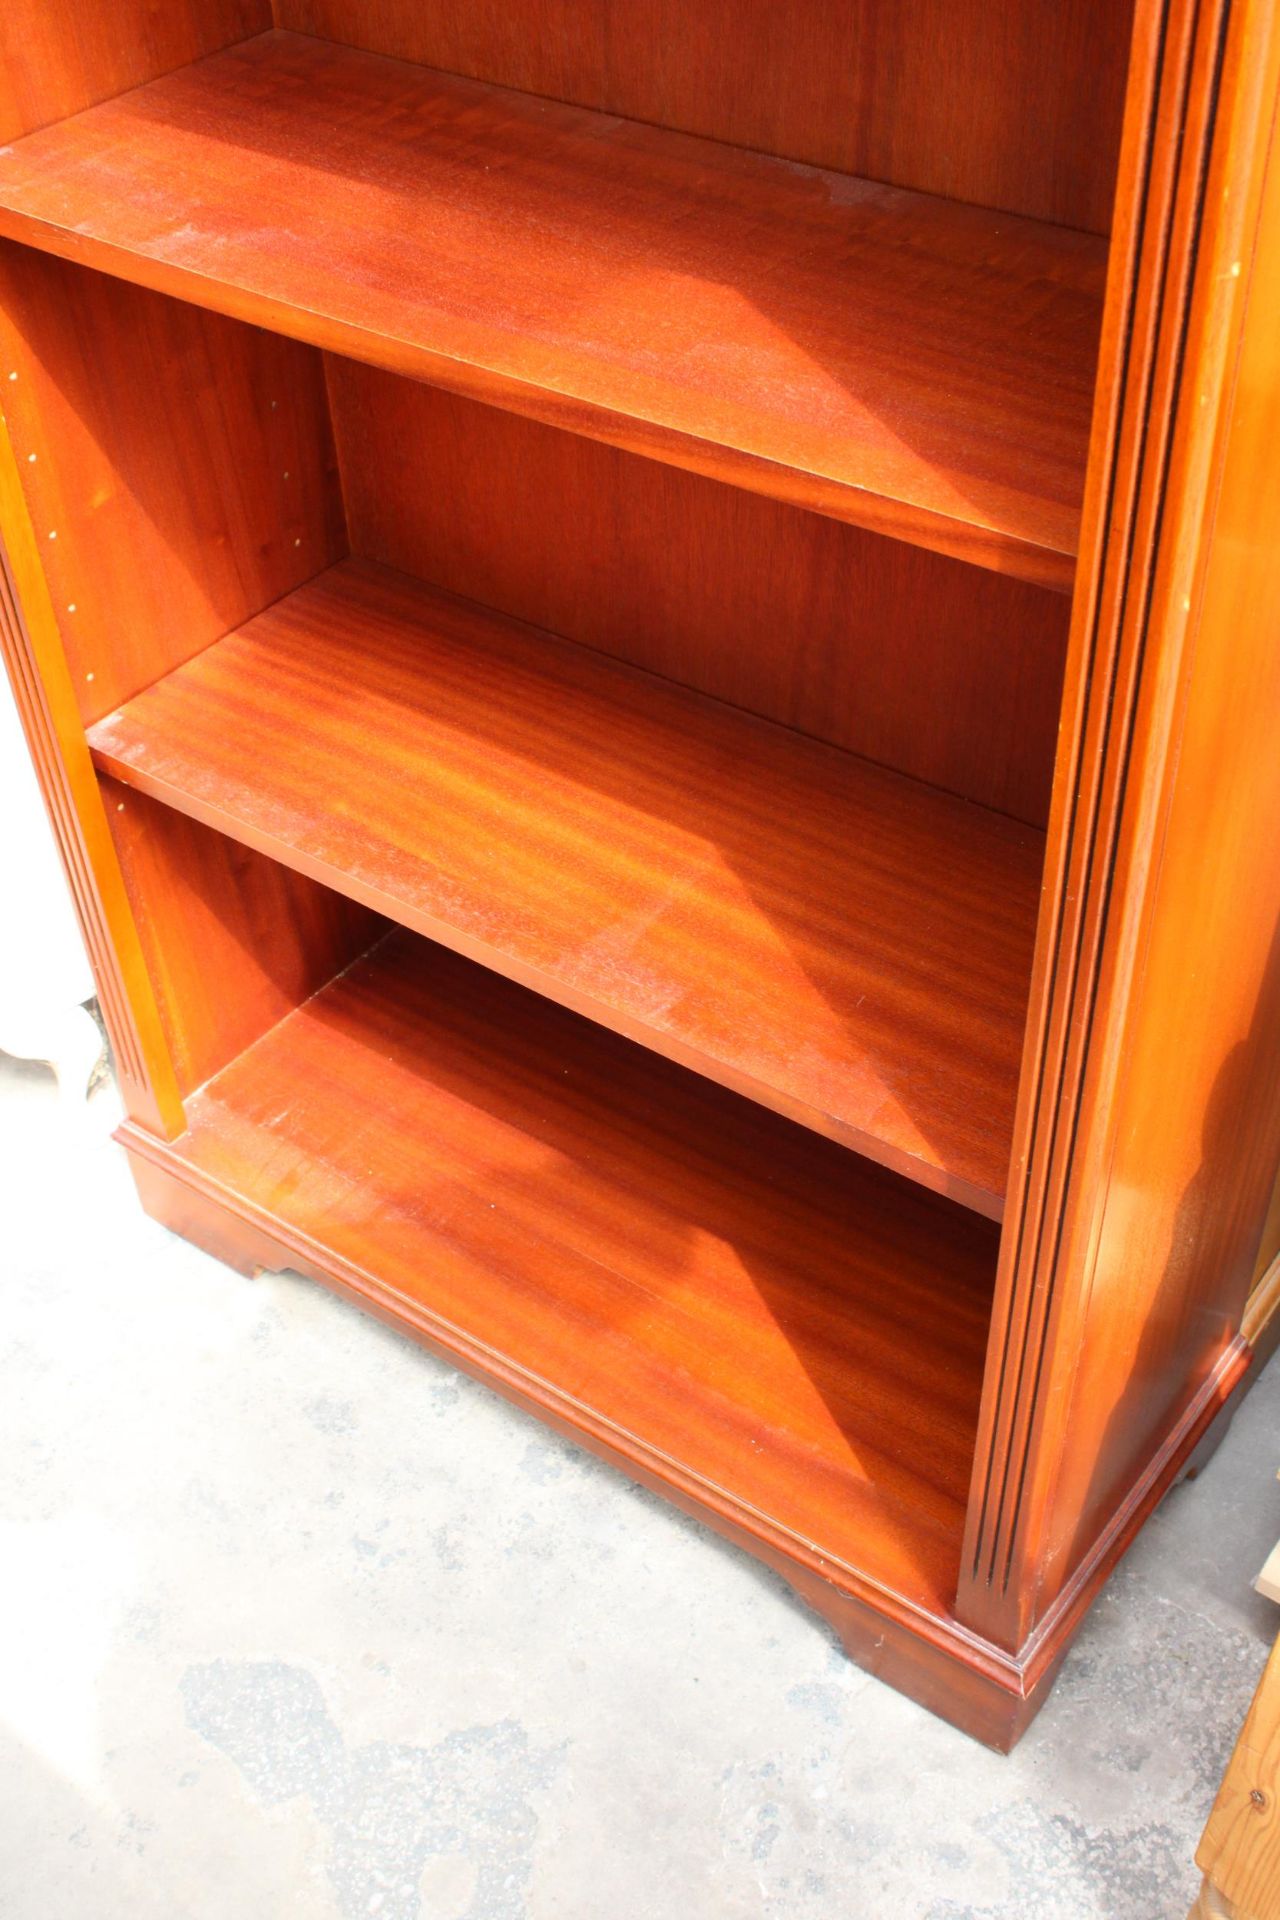 A MODERN MAHOGANY SIX TIER OPEN BOOKCASE, 33" WIDE - Image 3 of 3